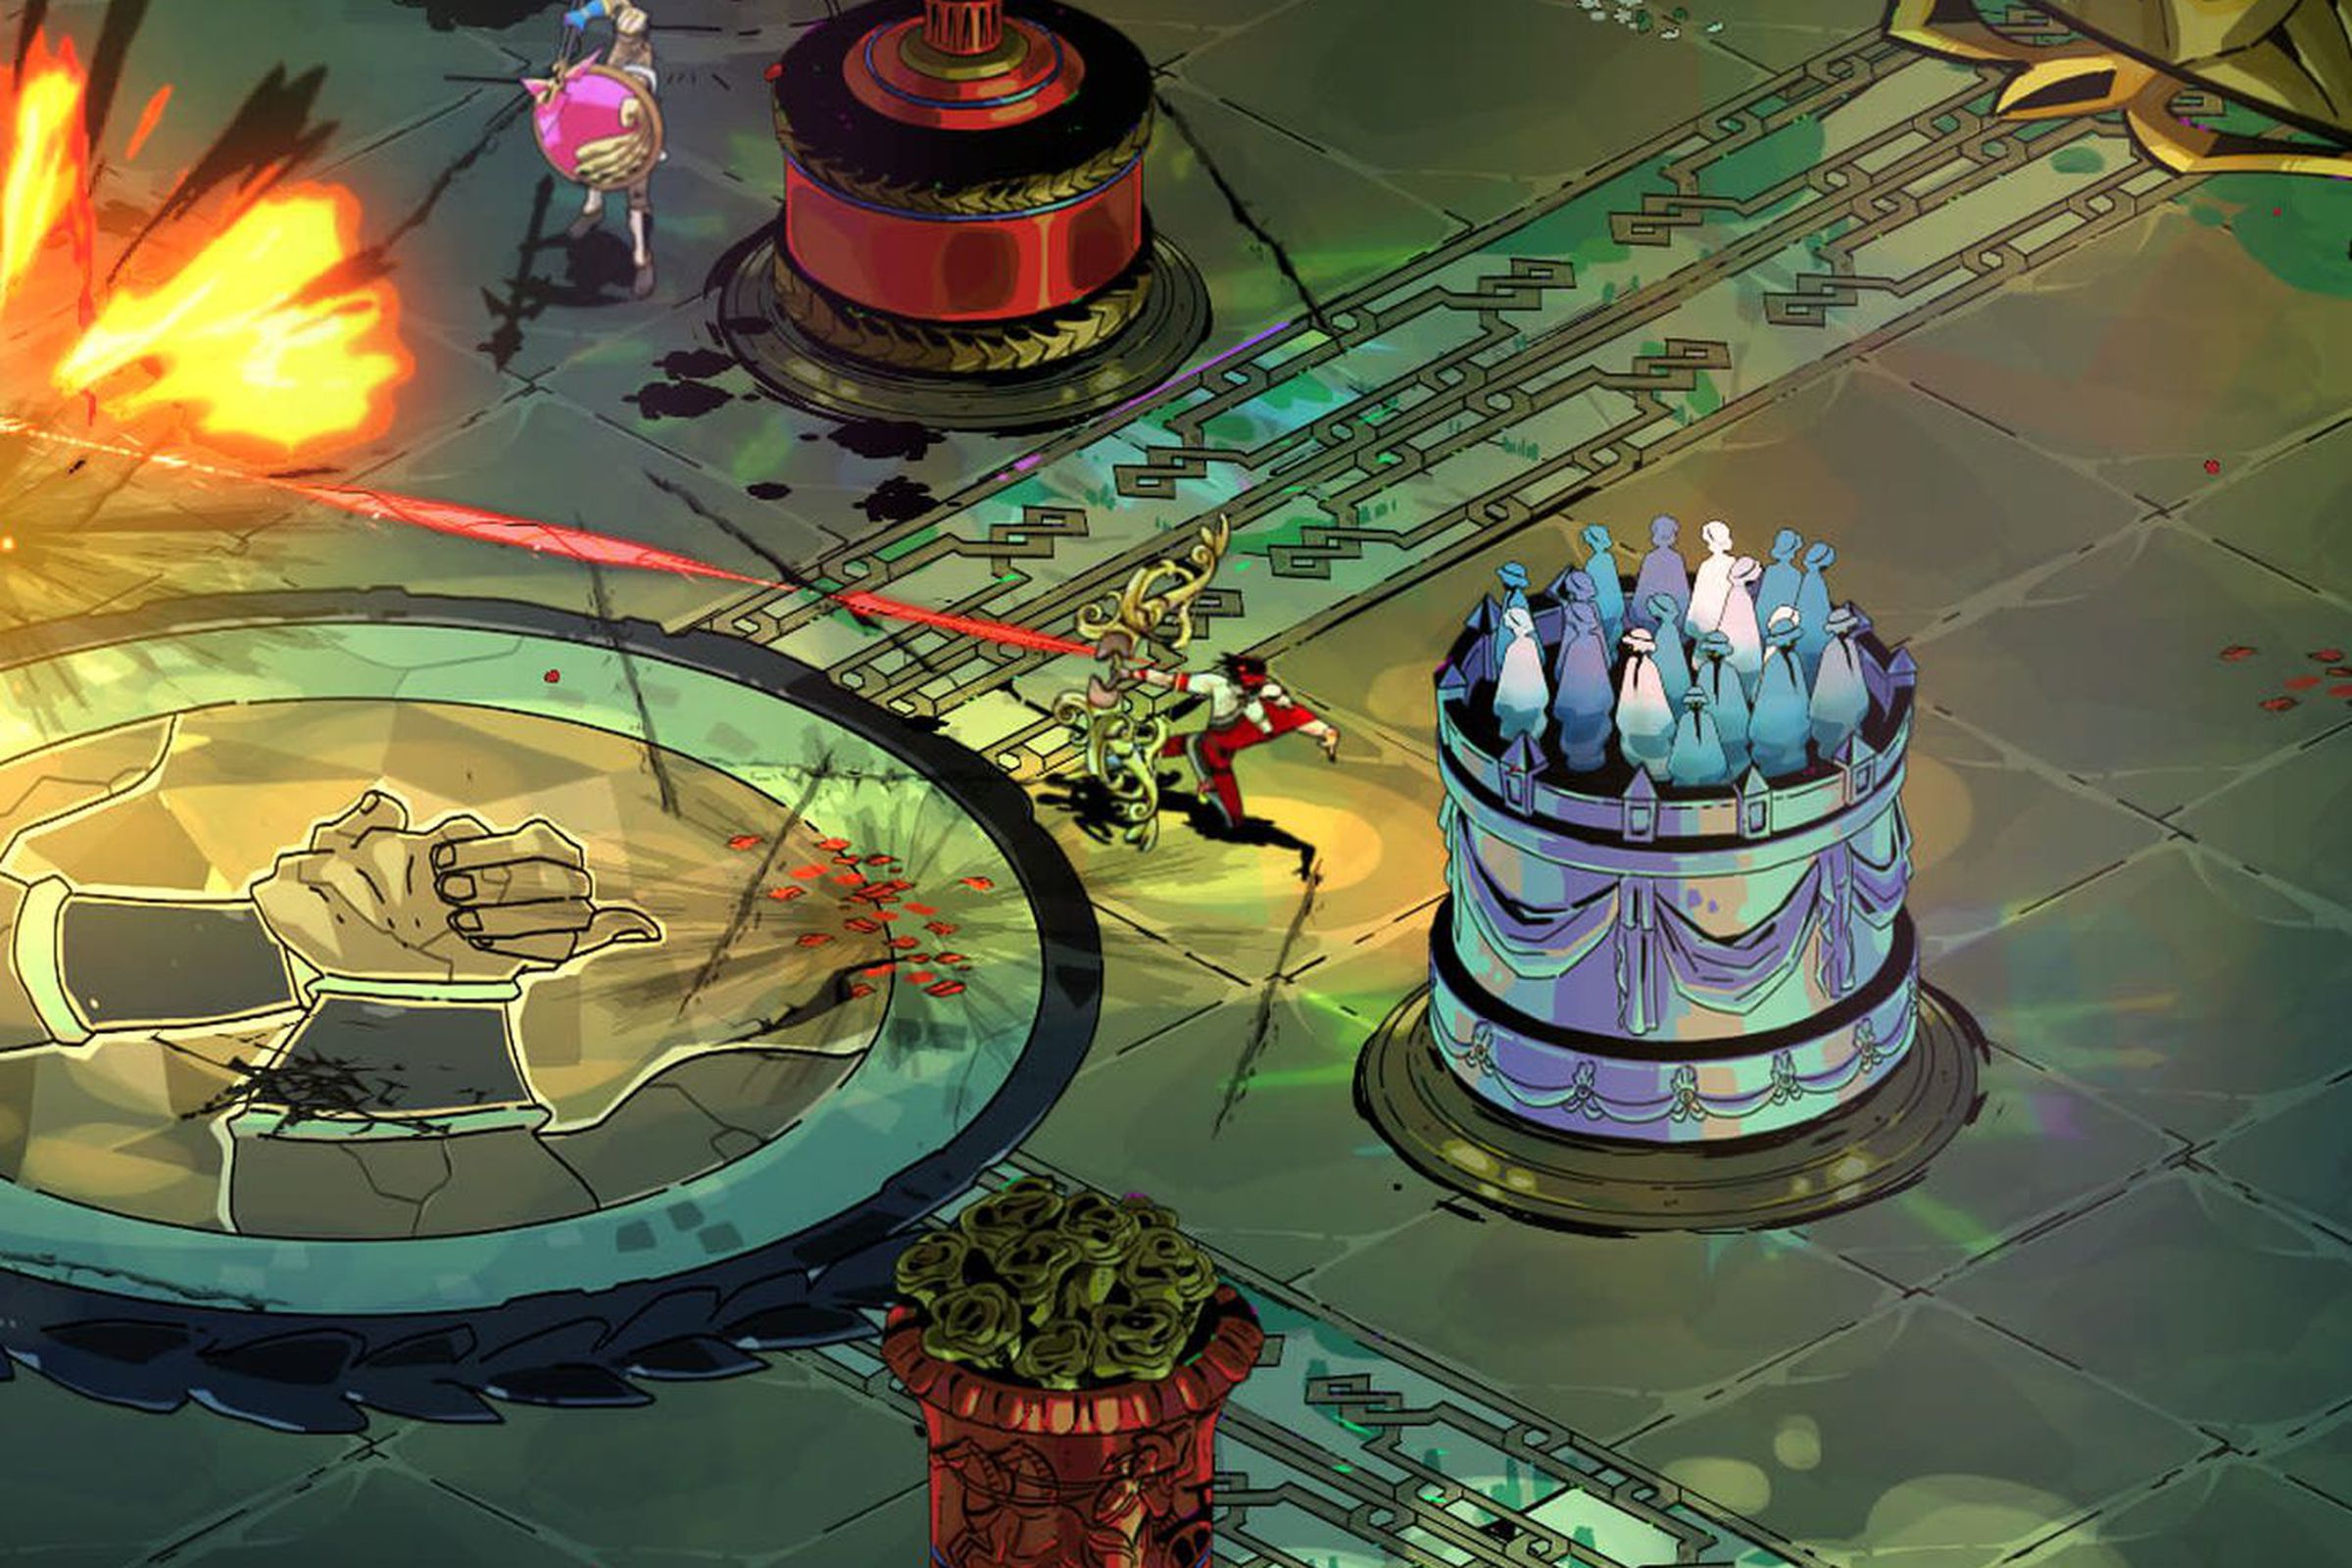 Game screenshot showing green surface with small tower with people standing on it, a large circle decorated with two clasping hands, a vase with greenery, and characters.